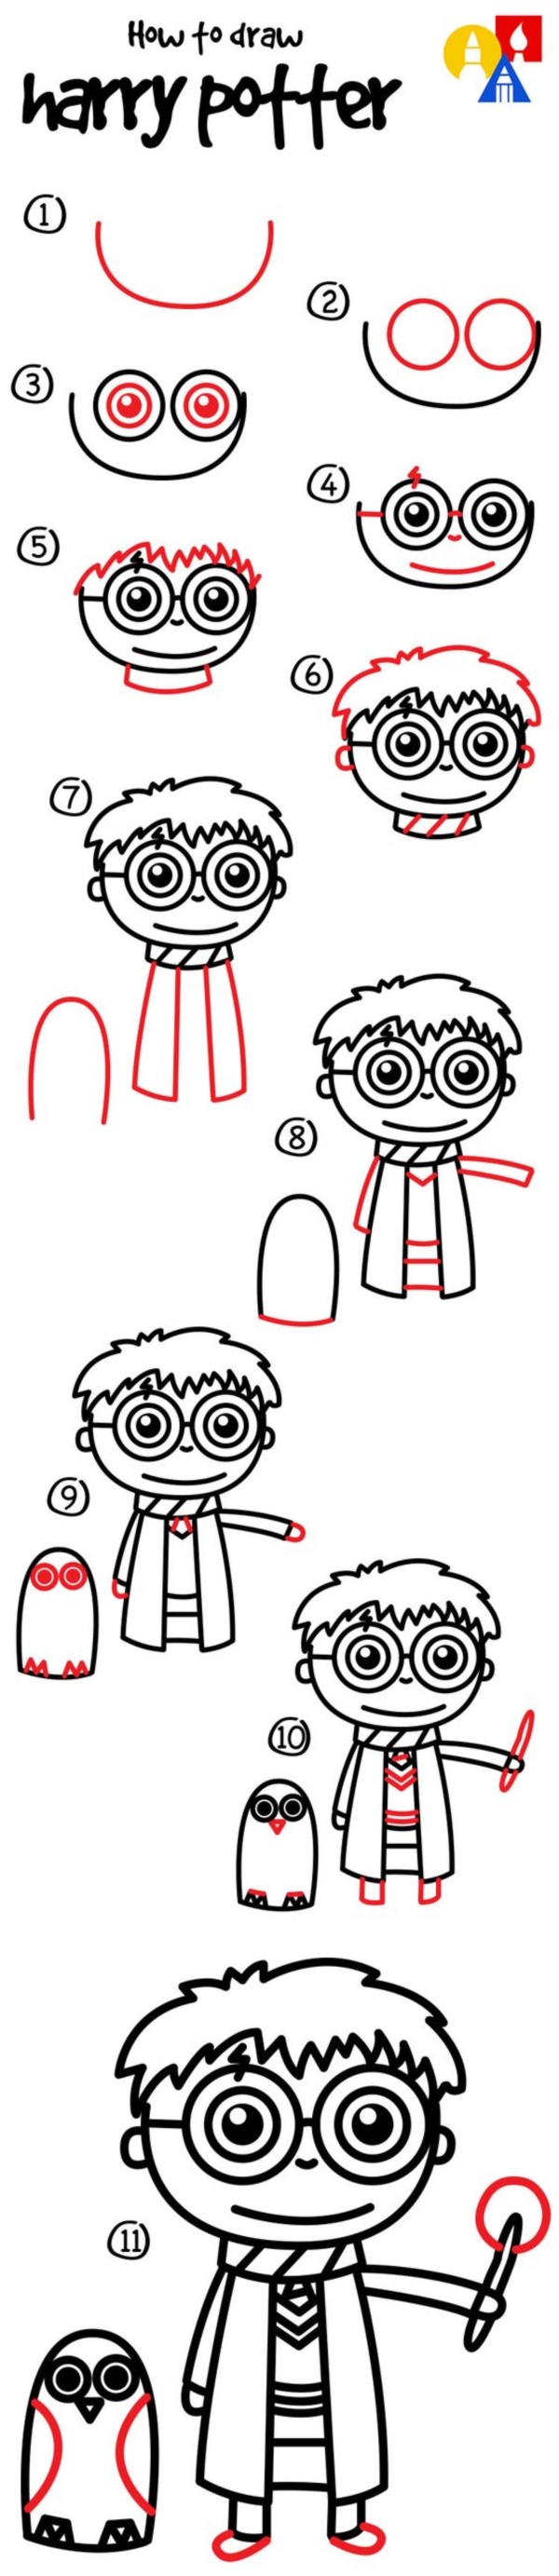 how-to-draw-doodles0141